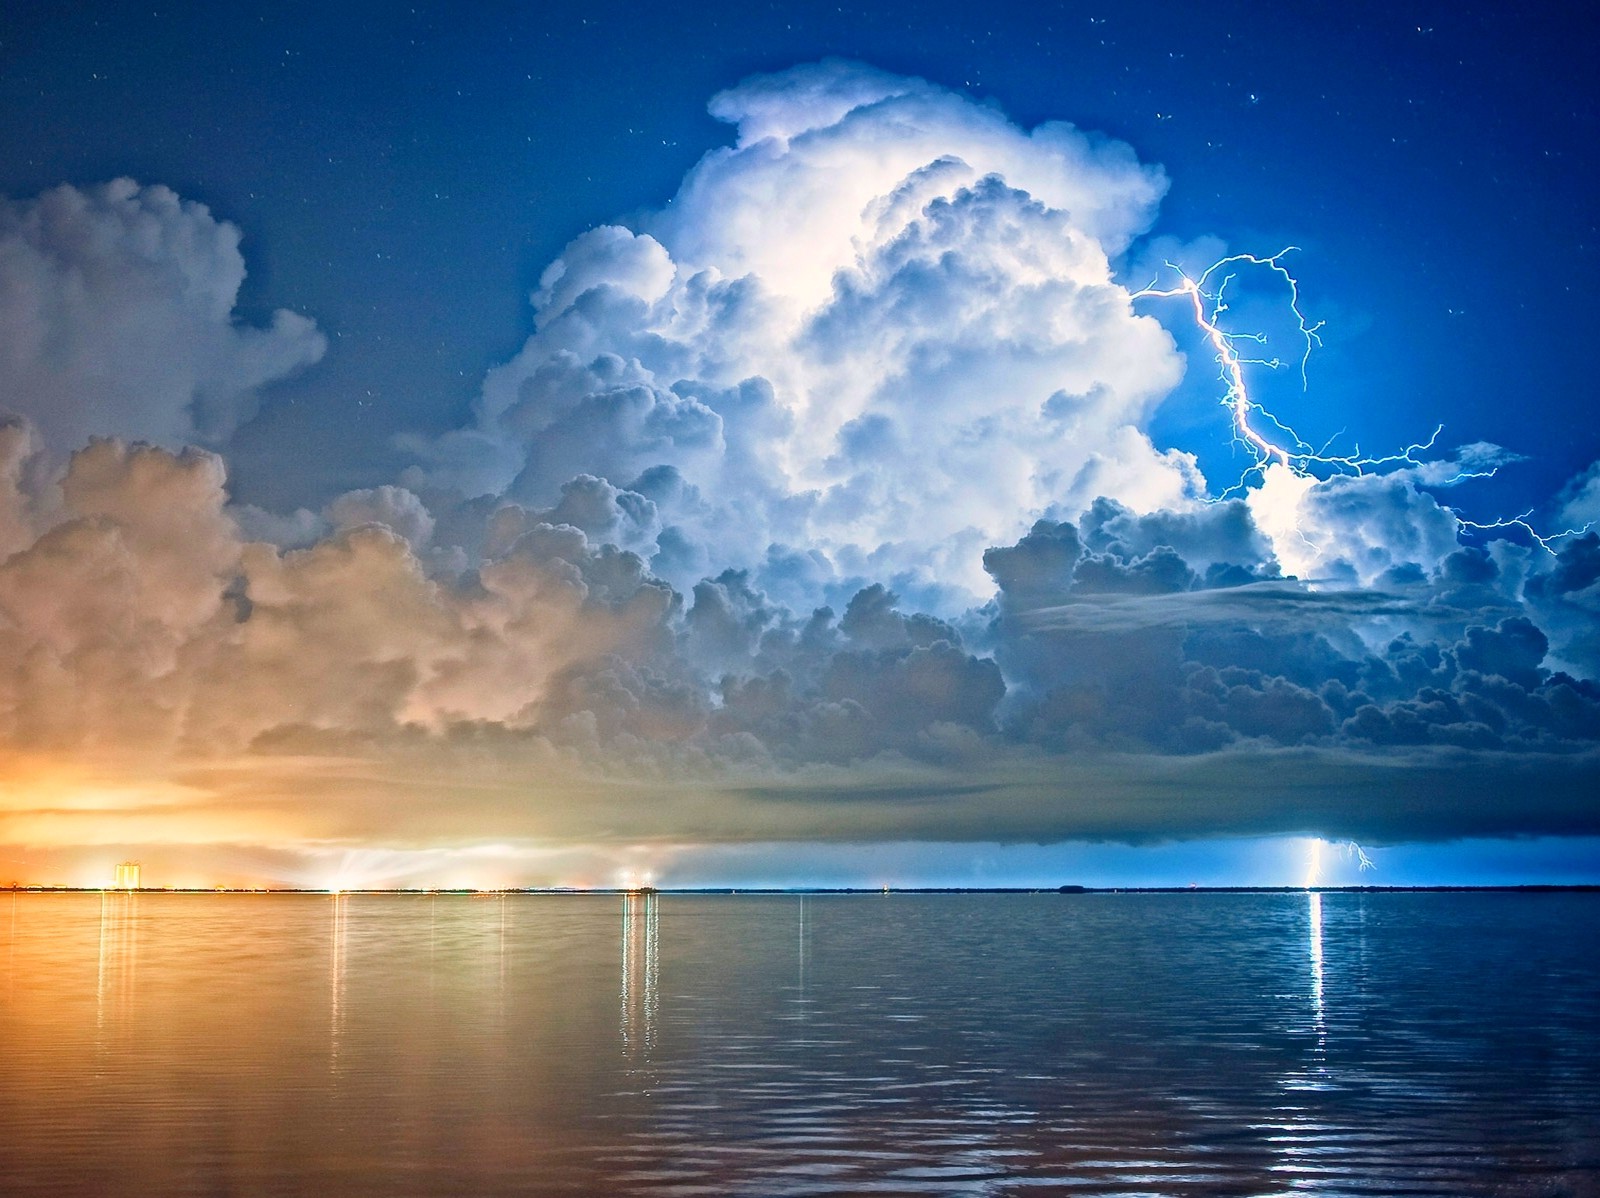 lightning, Clouds, Storm, Starry Night, Cape Canaveral, Florida, Sea, Street Light, Water, Blue, White, Yellow, Nature, Landscape Wallpaper